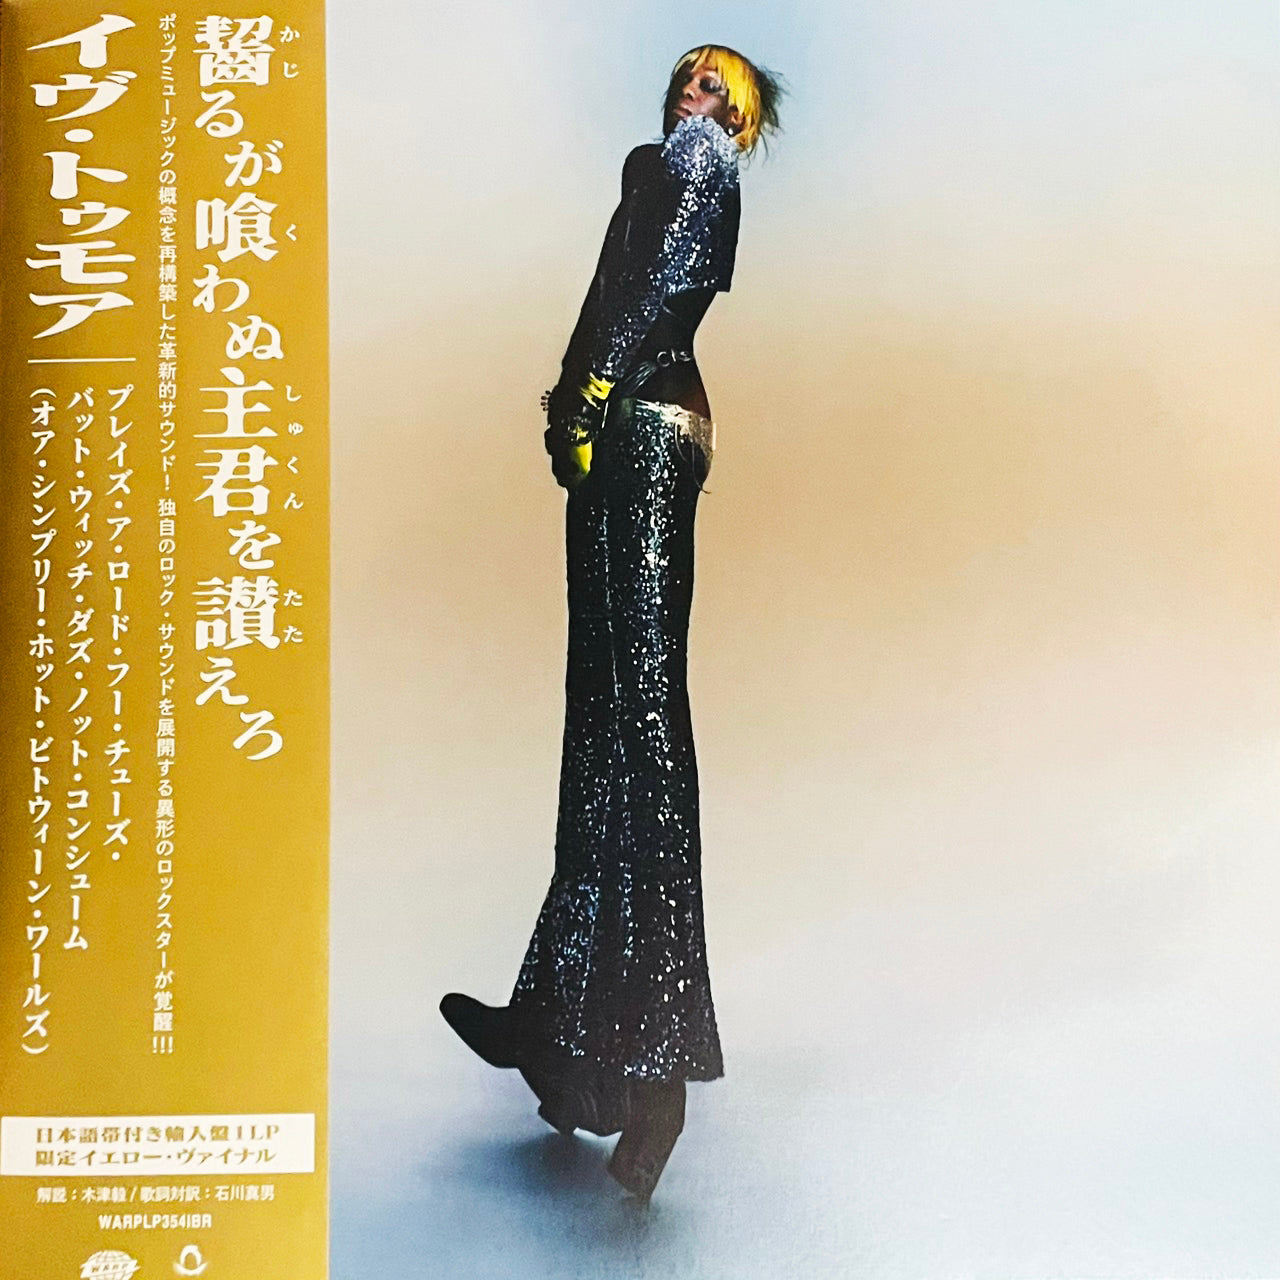 YVES TUNMOR 'PRAISE A LORD WHO CHEWS BUT WHICH DOES NOT CONSUME; (OR SIMPLY, HOT BETWEEN WORLDS) -LTD. JAPAN EDITON-'